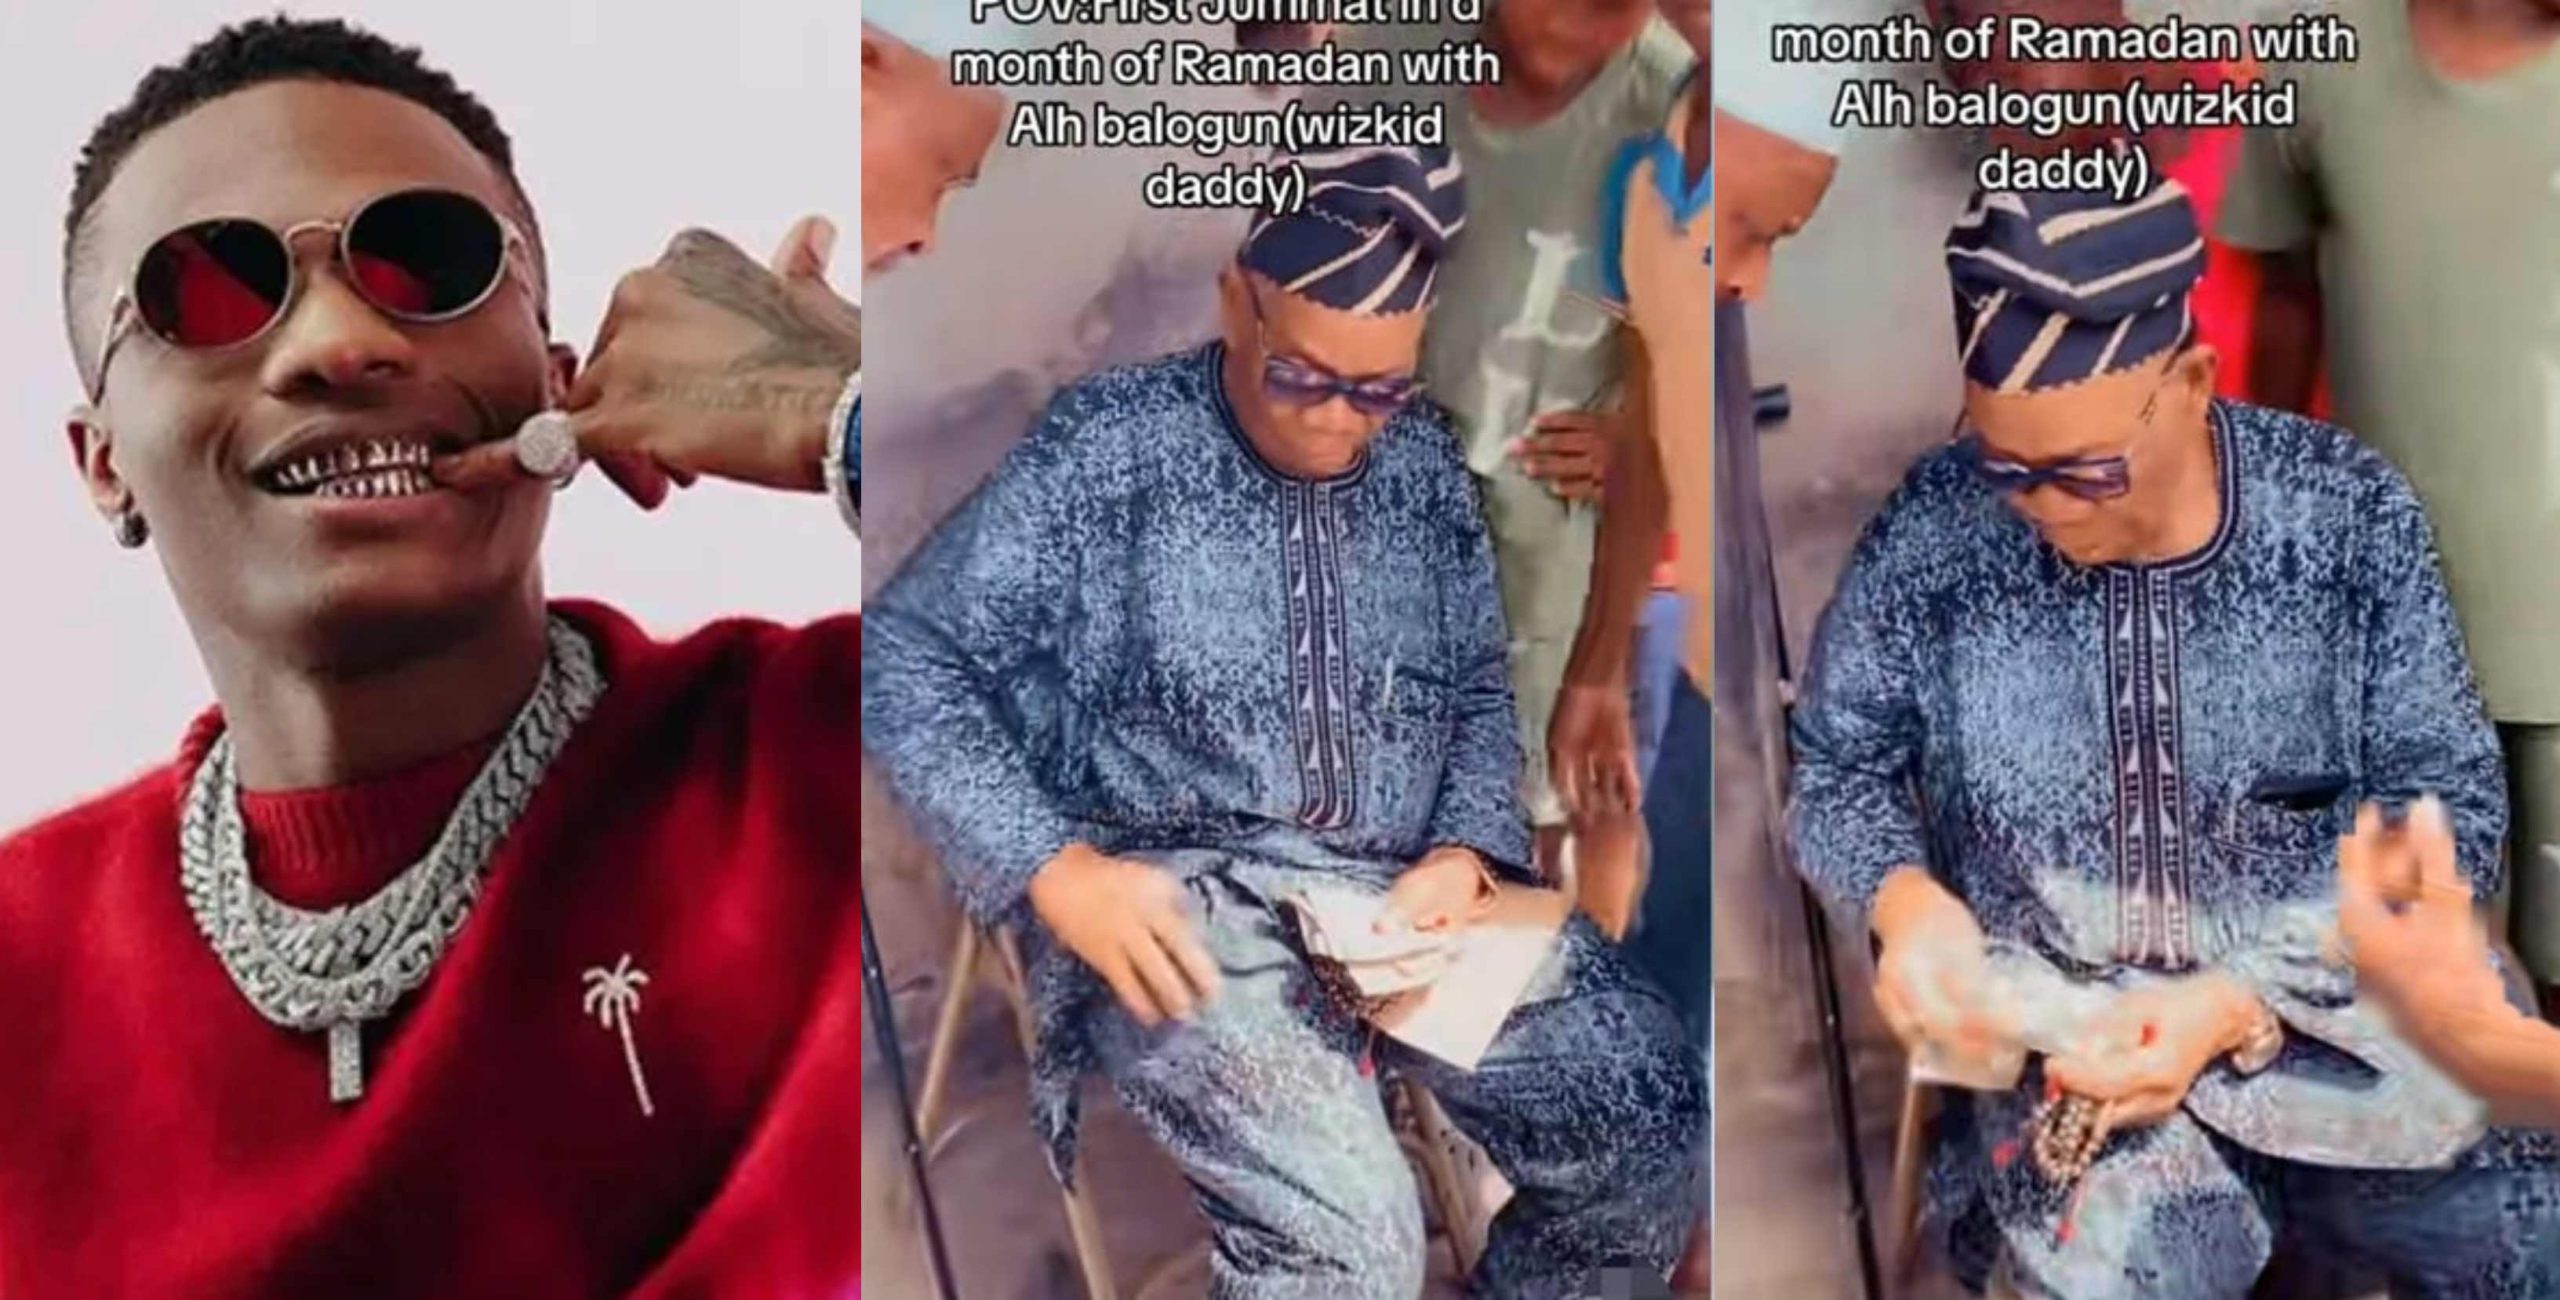 Mixed reactions as Wizkid’s father, Alhaji Balogun spotted distributing cash to youths and clerics during Ramadan